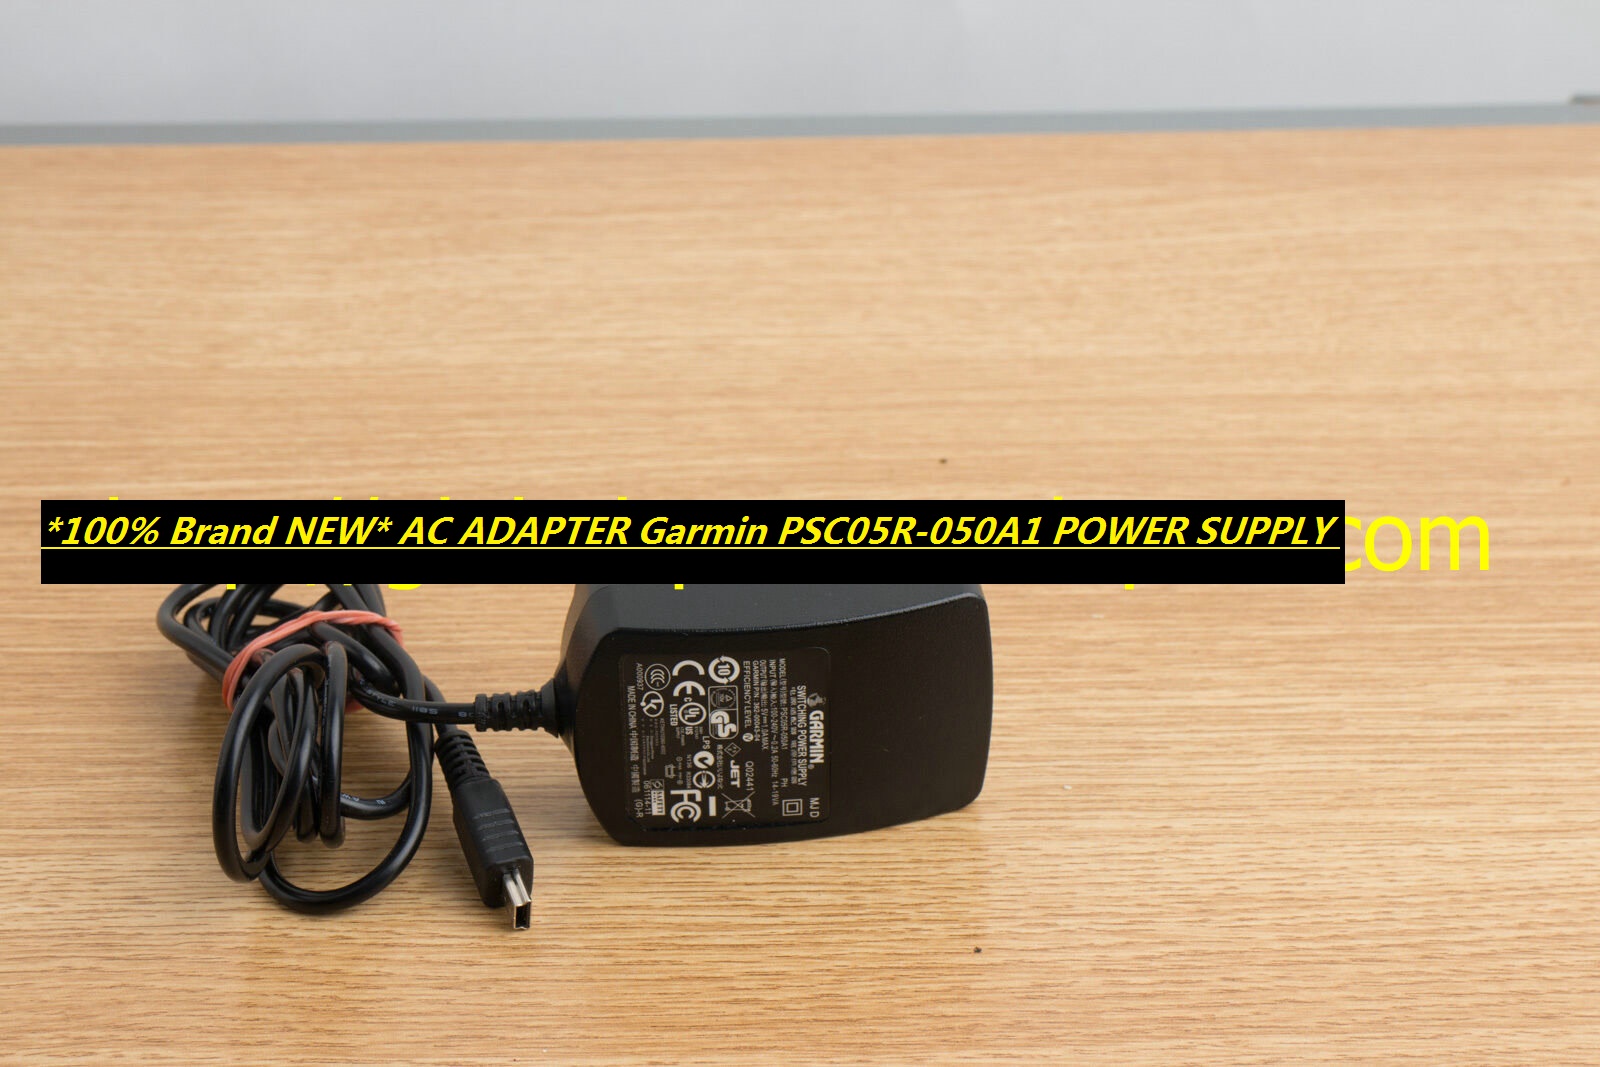 *100% Brand NEW* AC ADAPTER Garmin PSC05R-050A1 POWER SUPPLY - Click Image to Close